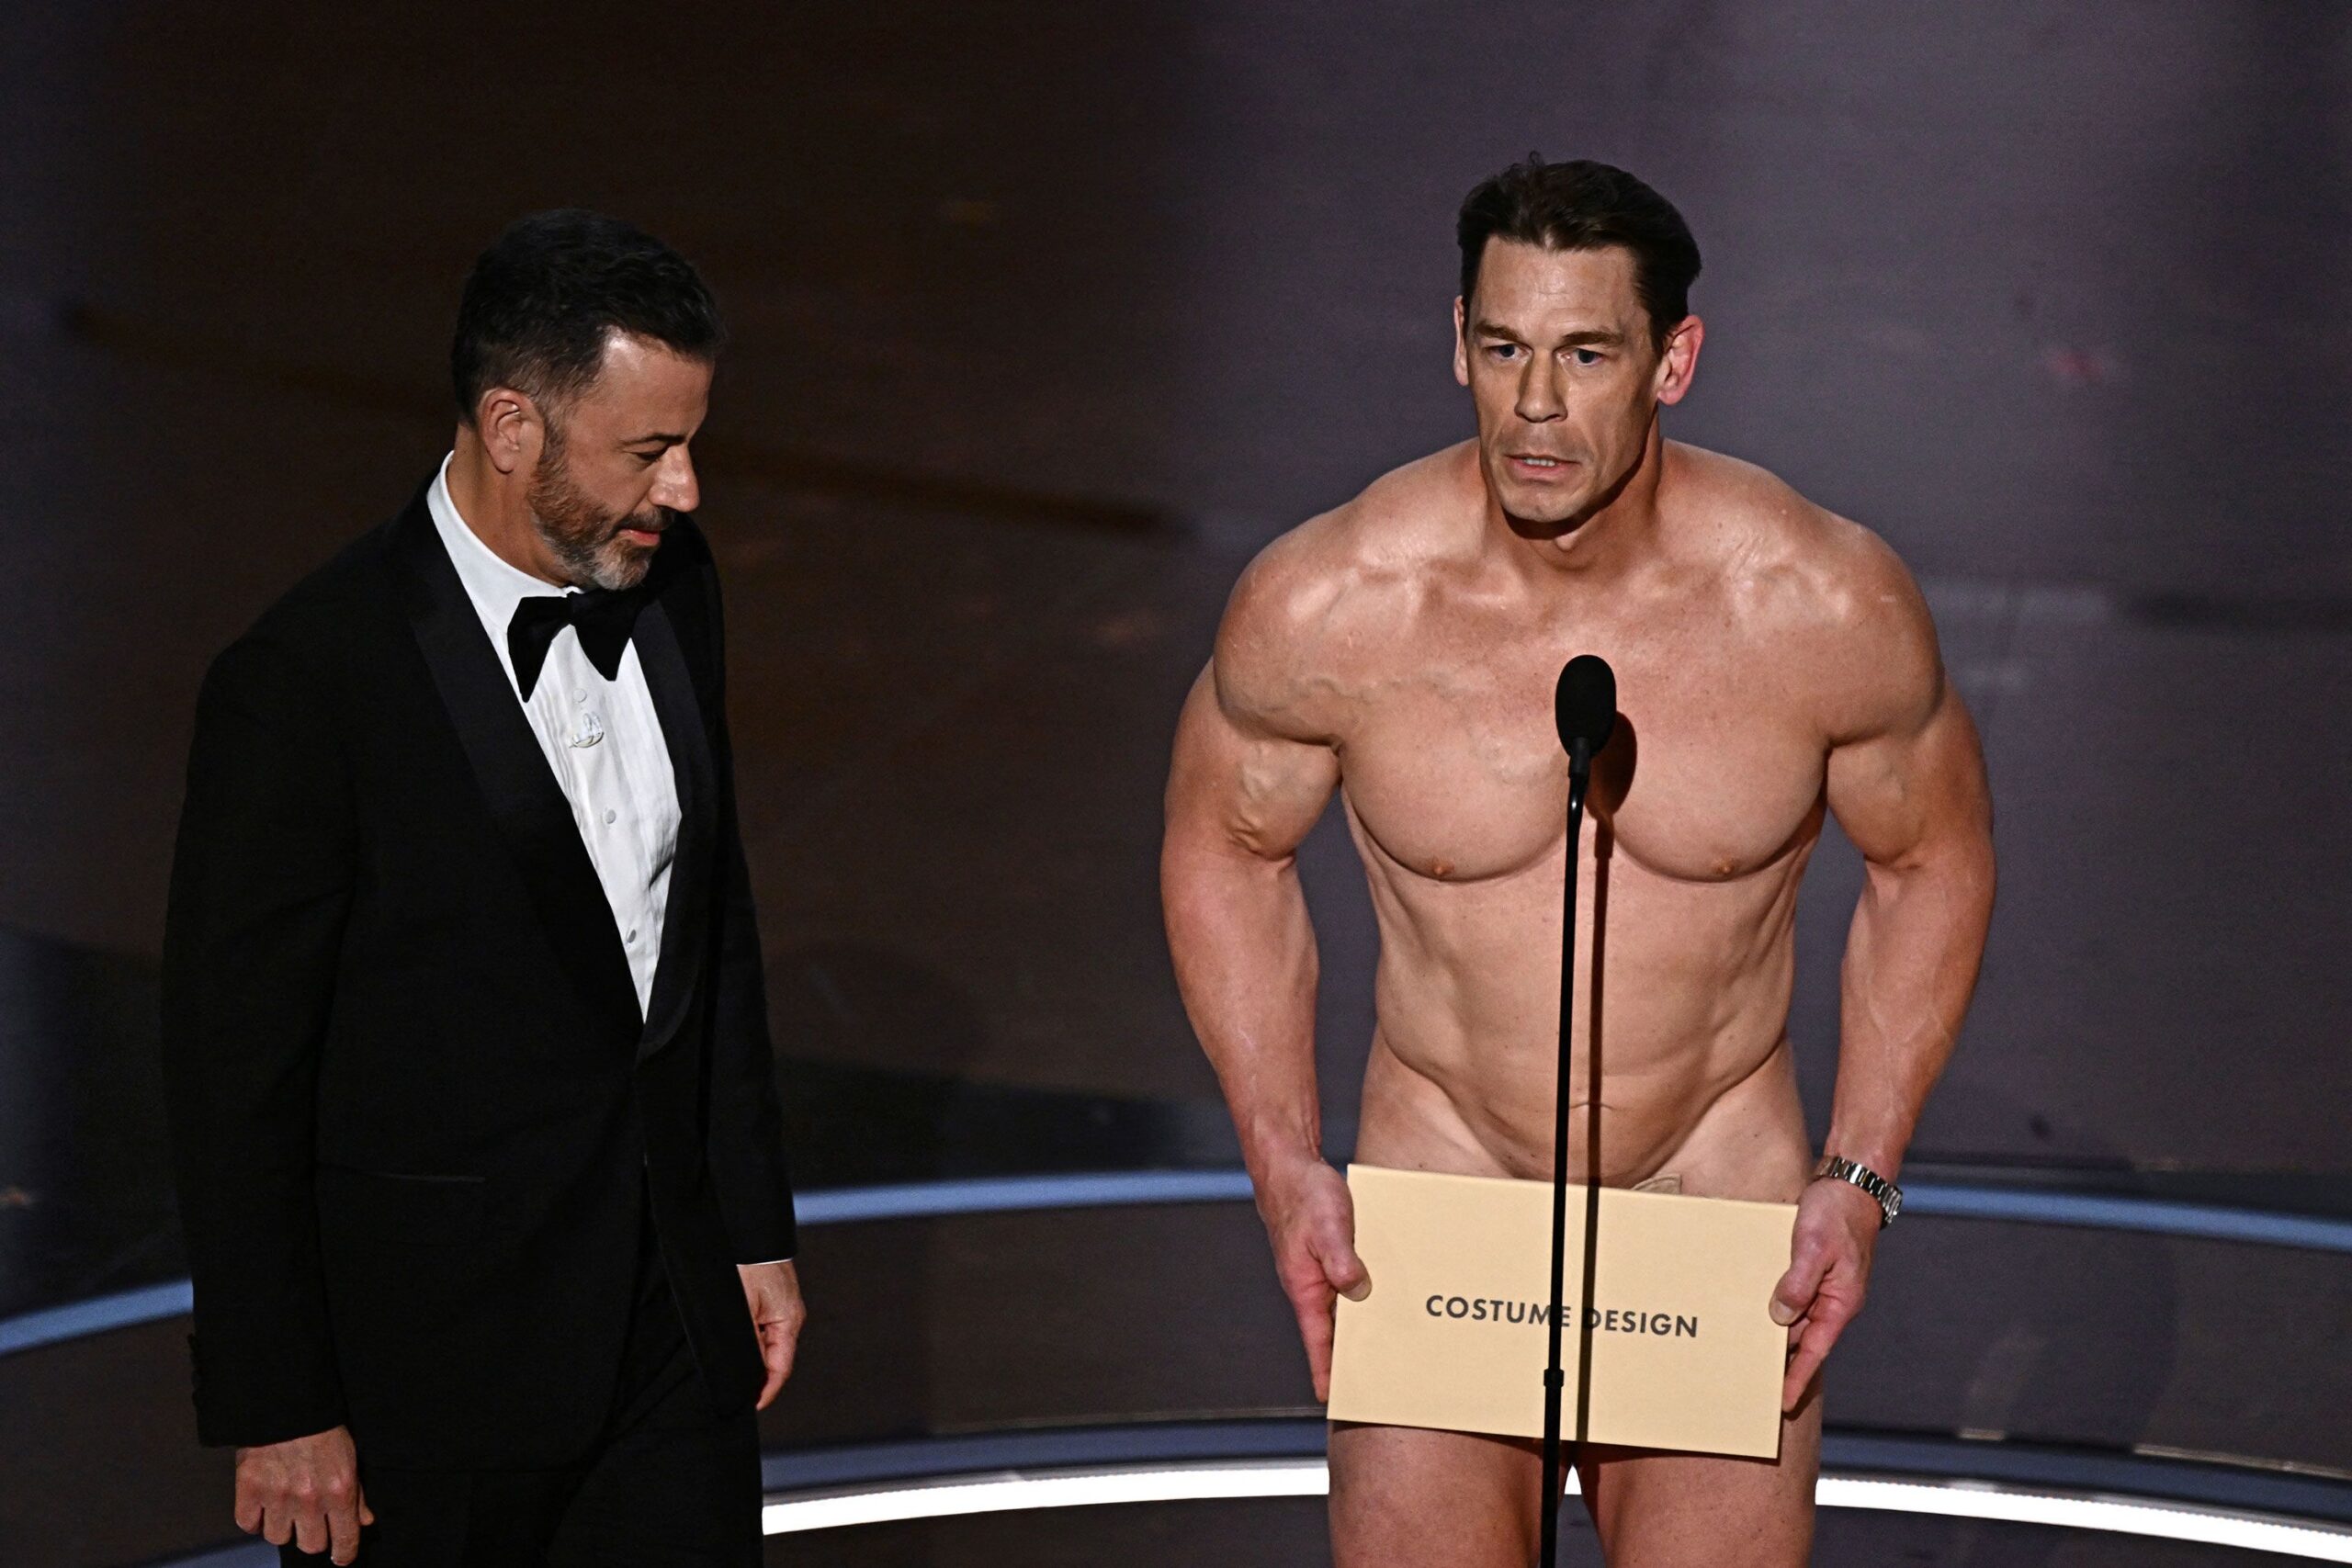 John Cena gives out costume design Oscar in his ‘birthday suit’ - Entertainment - News